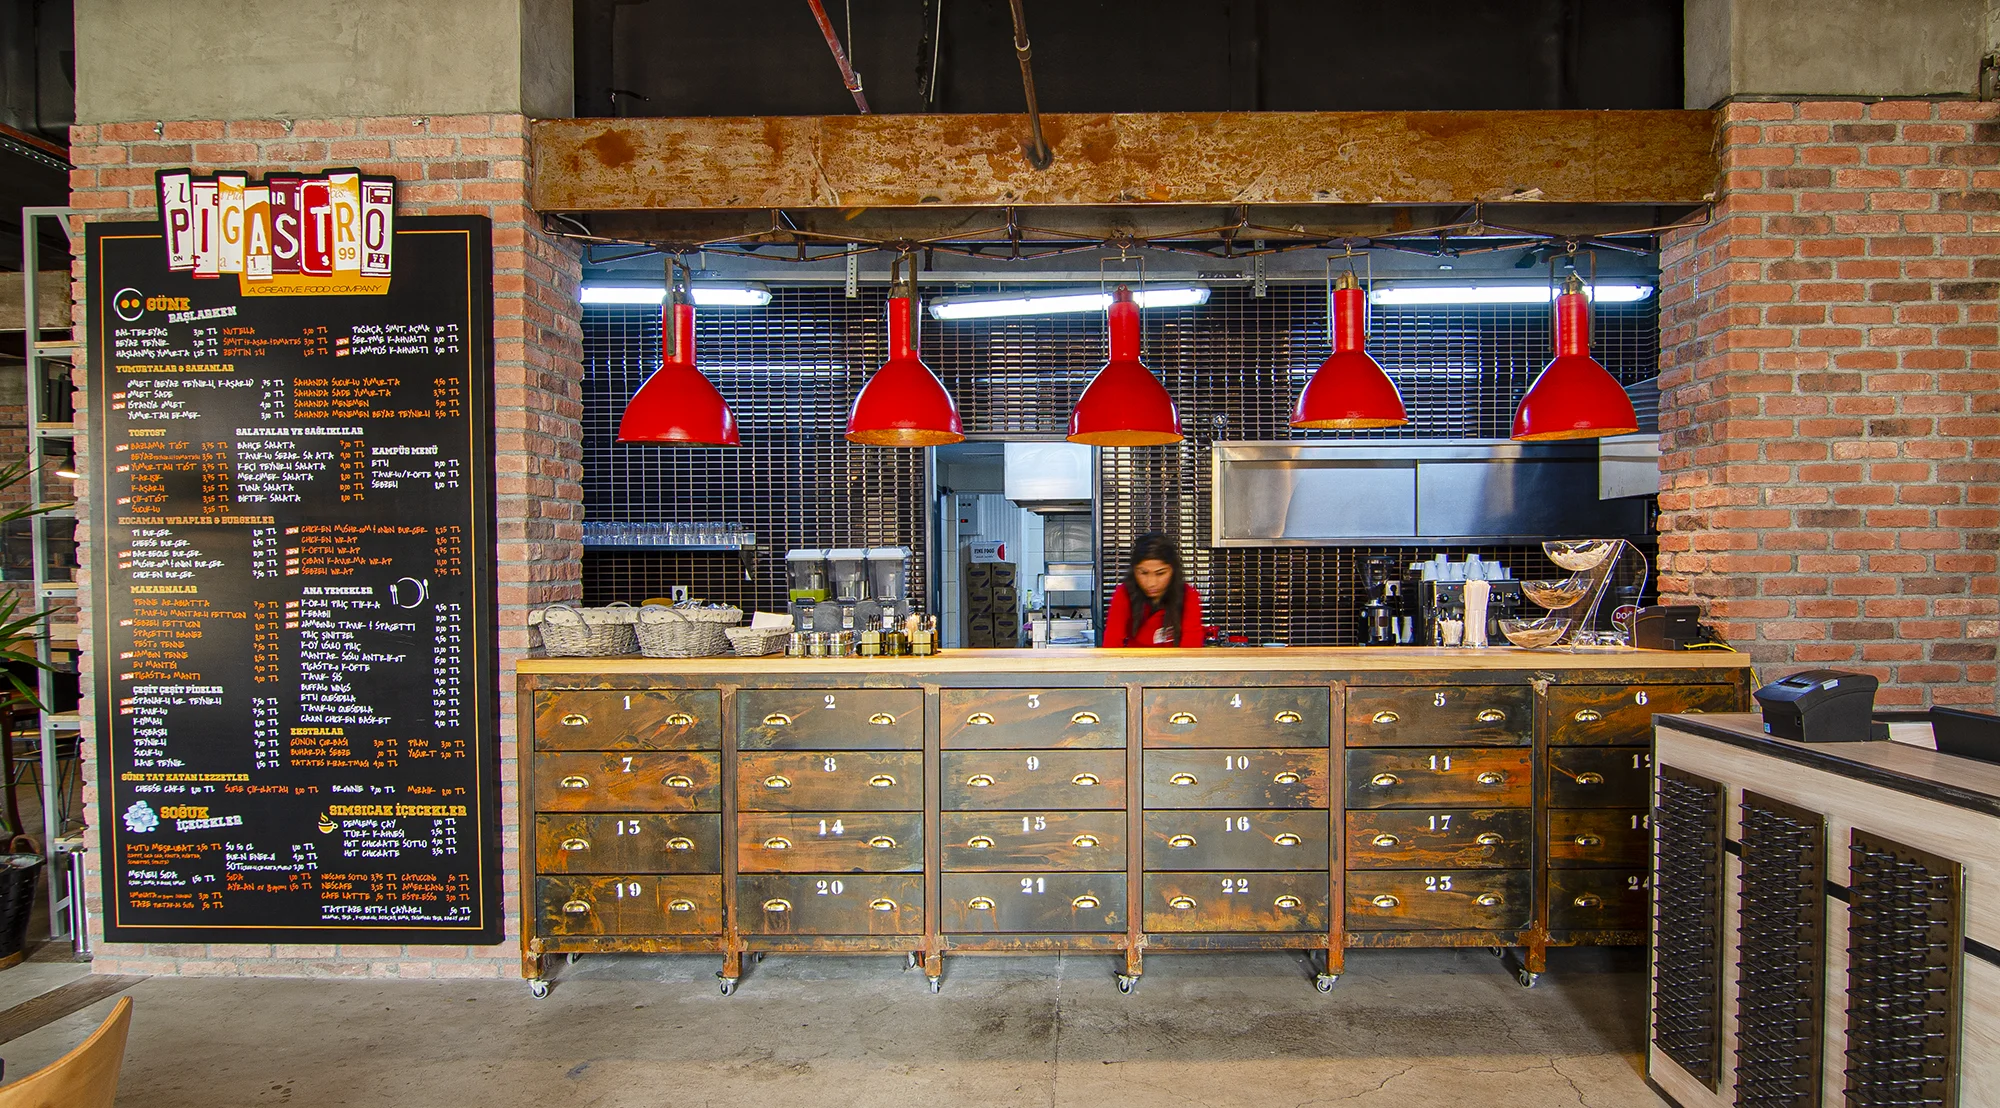 Large Cafe with thin red brick walls